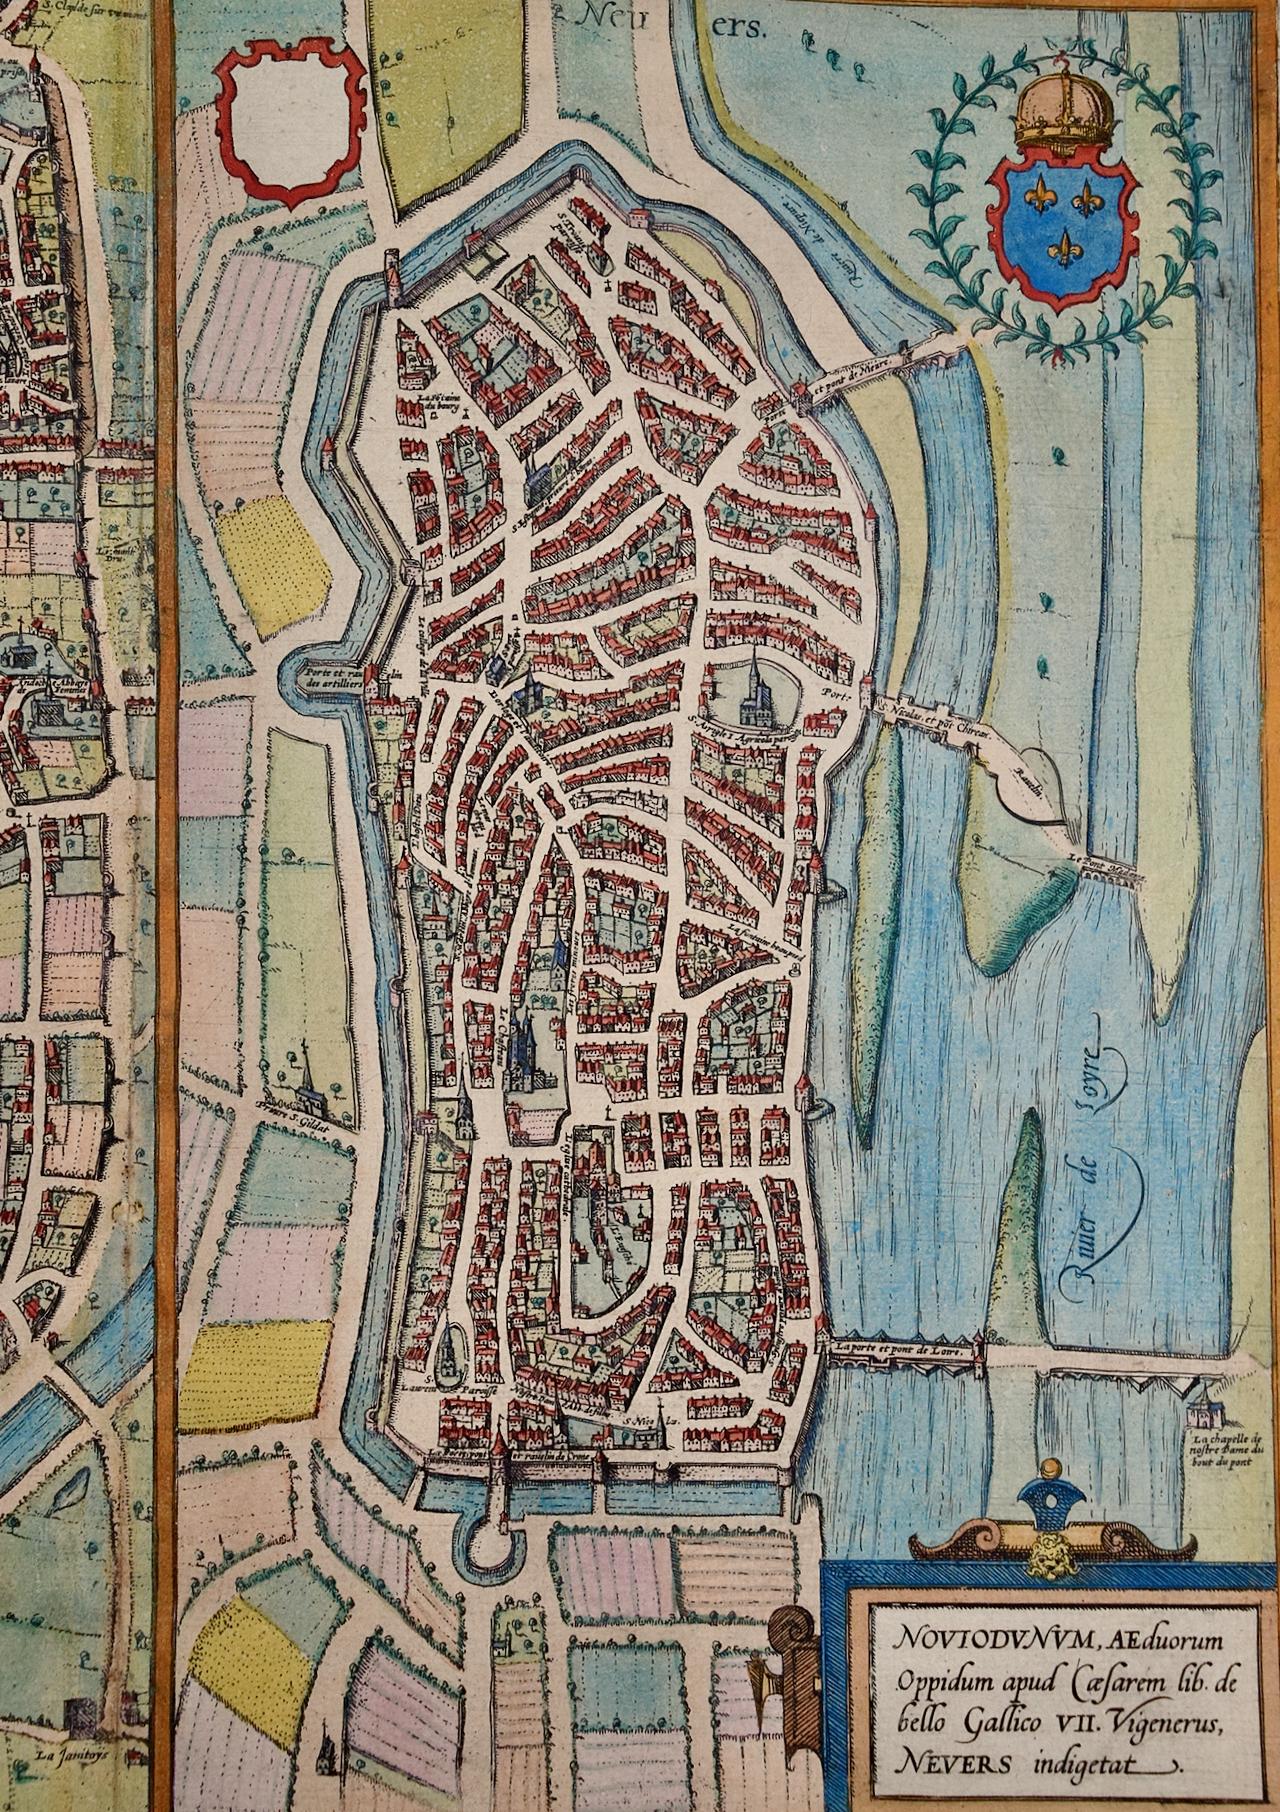 This is a pair of 16th century original hand-colored copperplate engraved maps on one sheet by Georg Braun & Franz Hogenberg, in volume III of their famous city atlas 